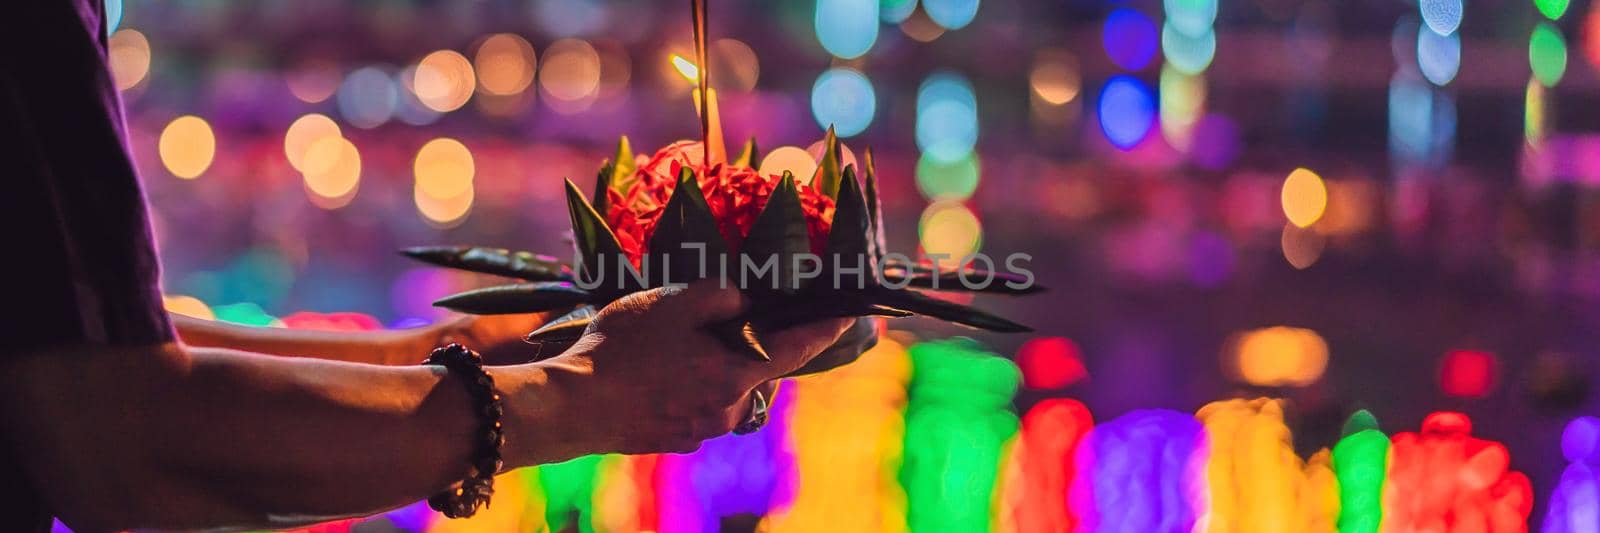 Loy Krathong festival, People buy flowers and candle to light and float on water to celebrate the Loy Krathong festival in Thailand. BANNER, LONG FORMAT